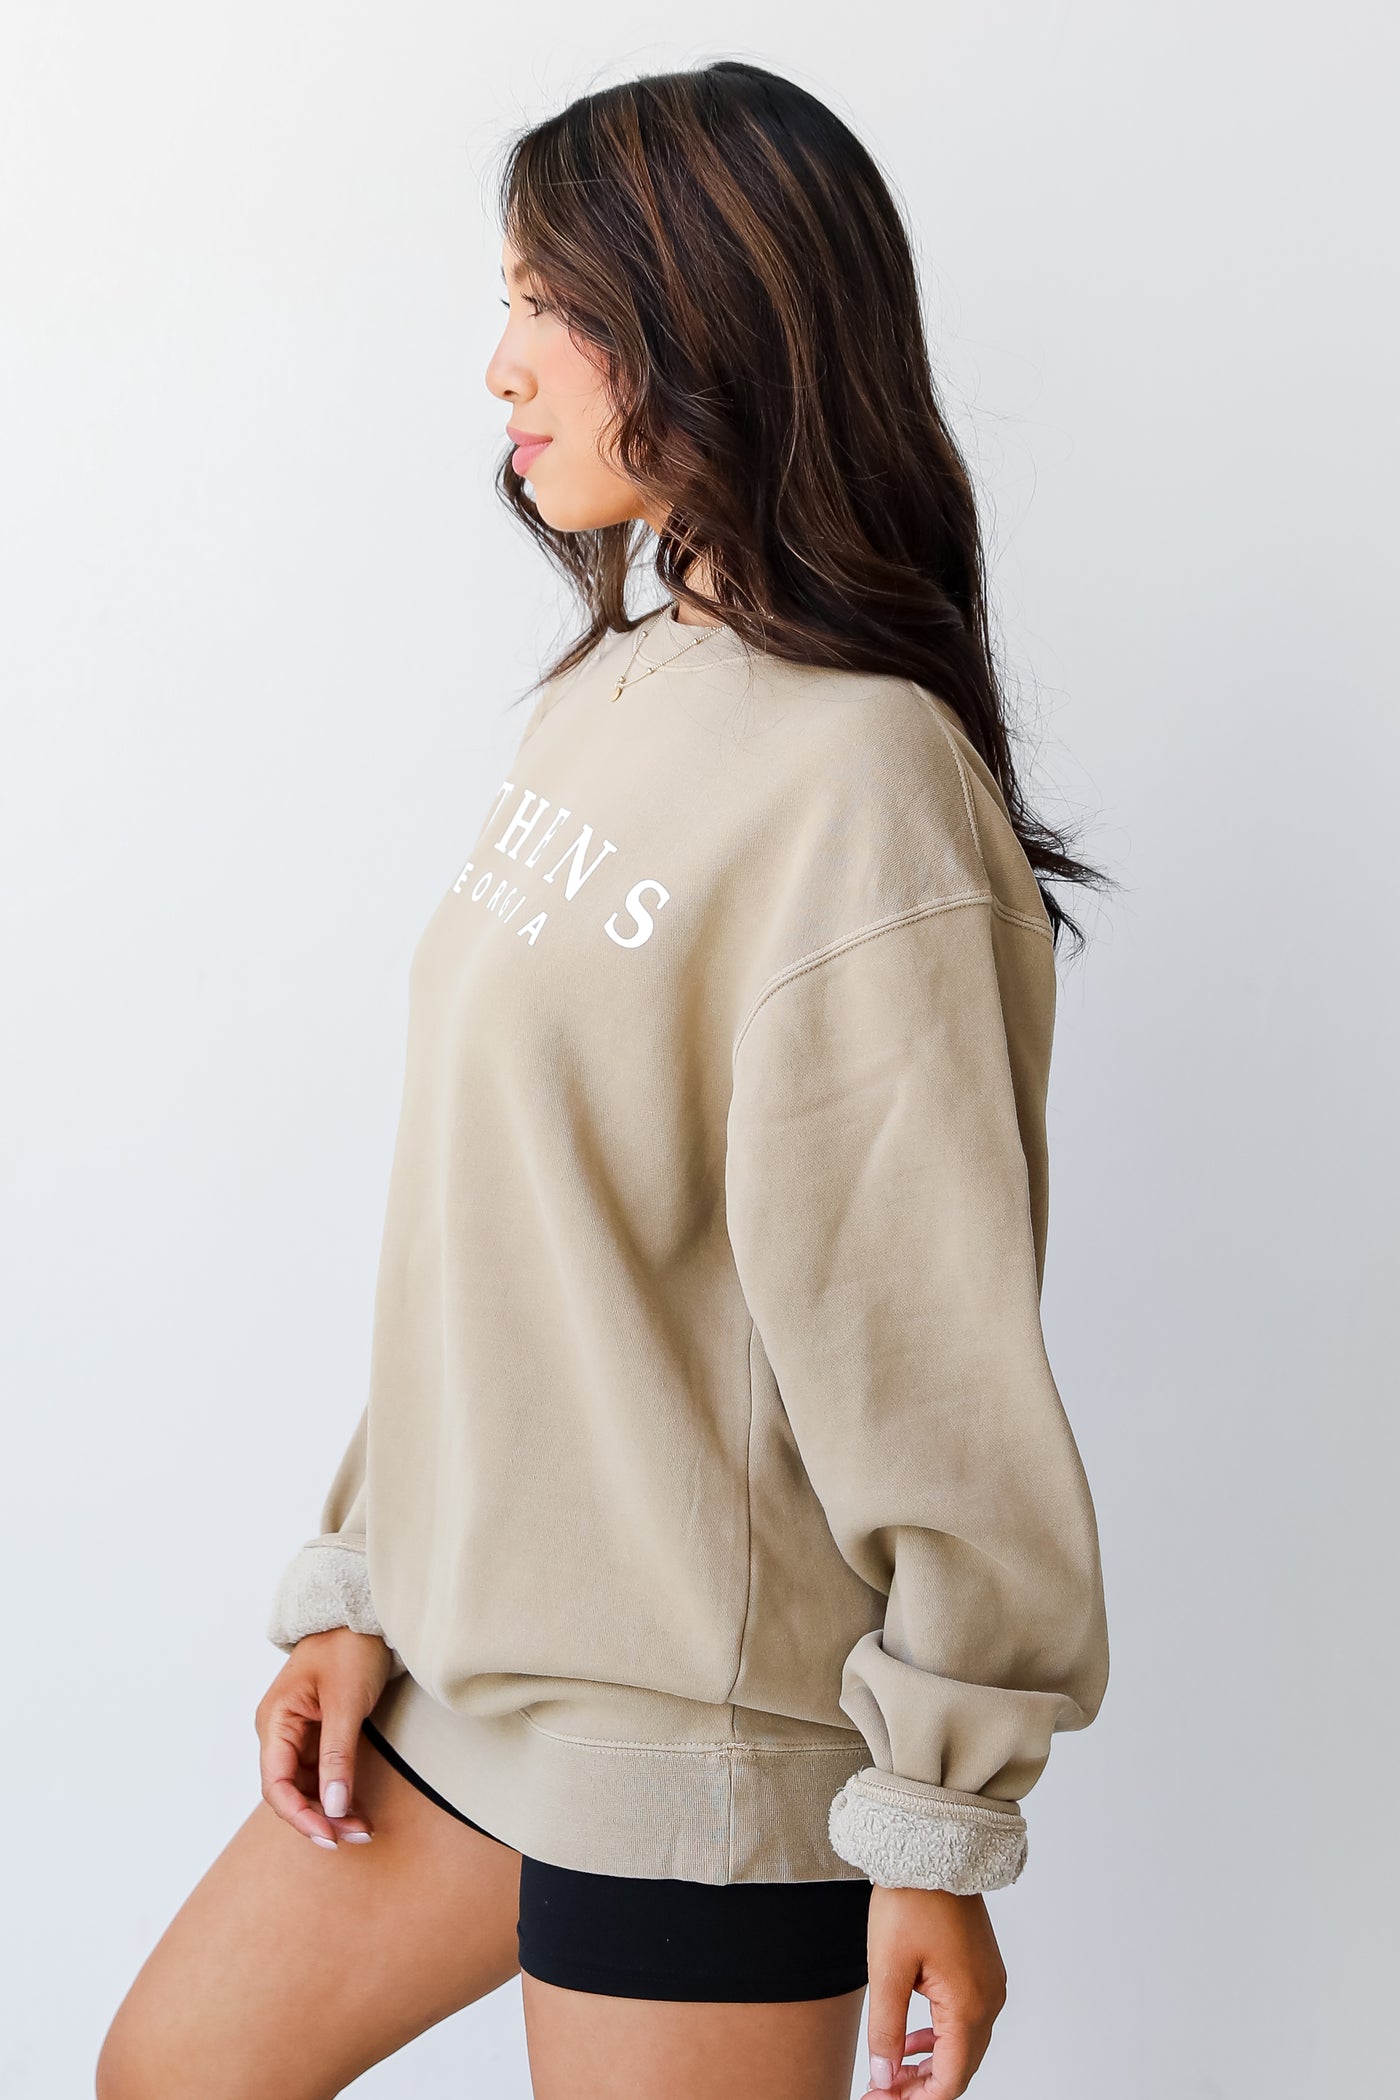 Tan Athens Georgia Pullover side view